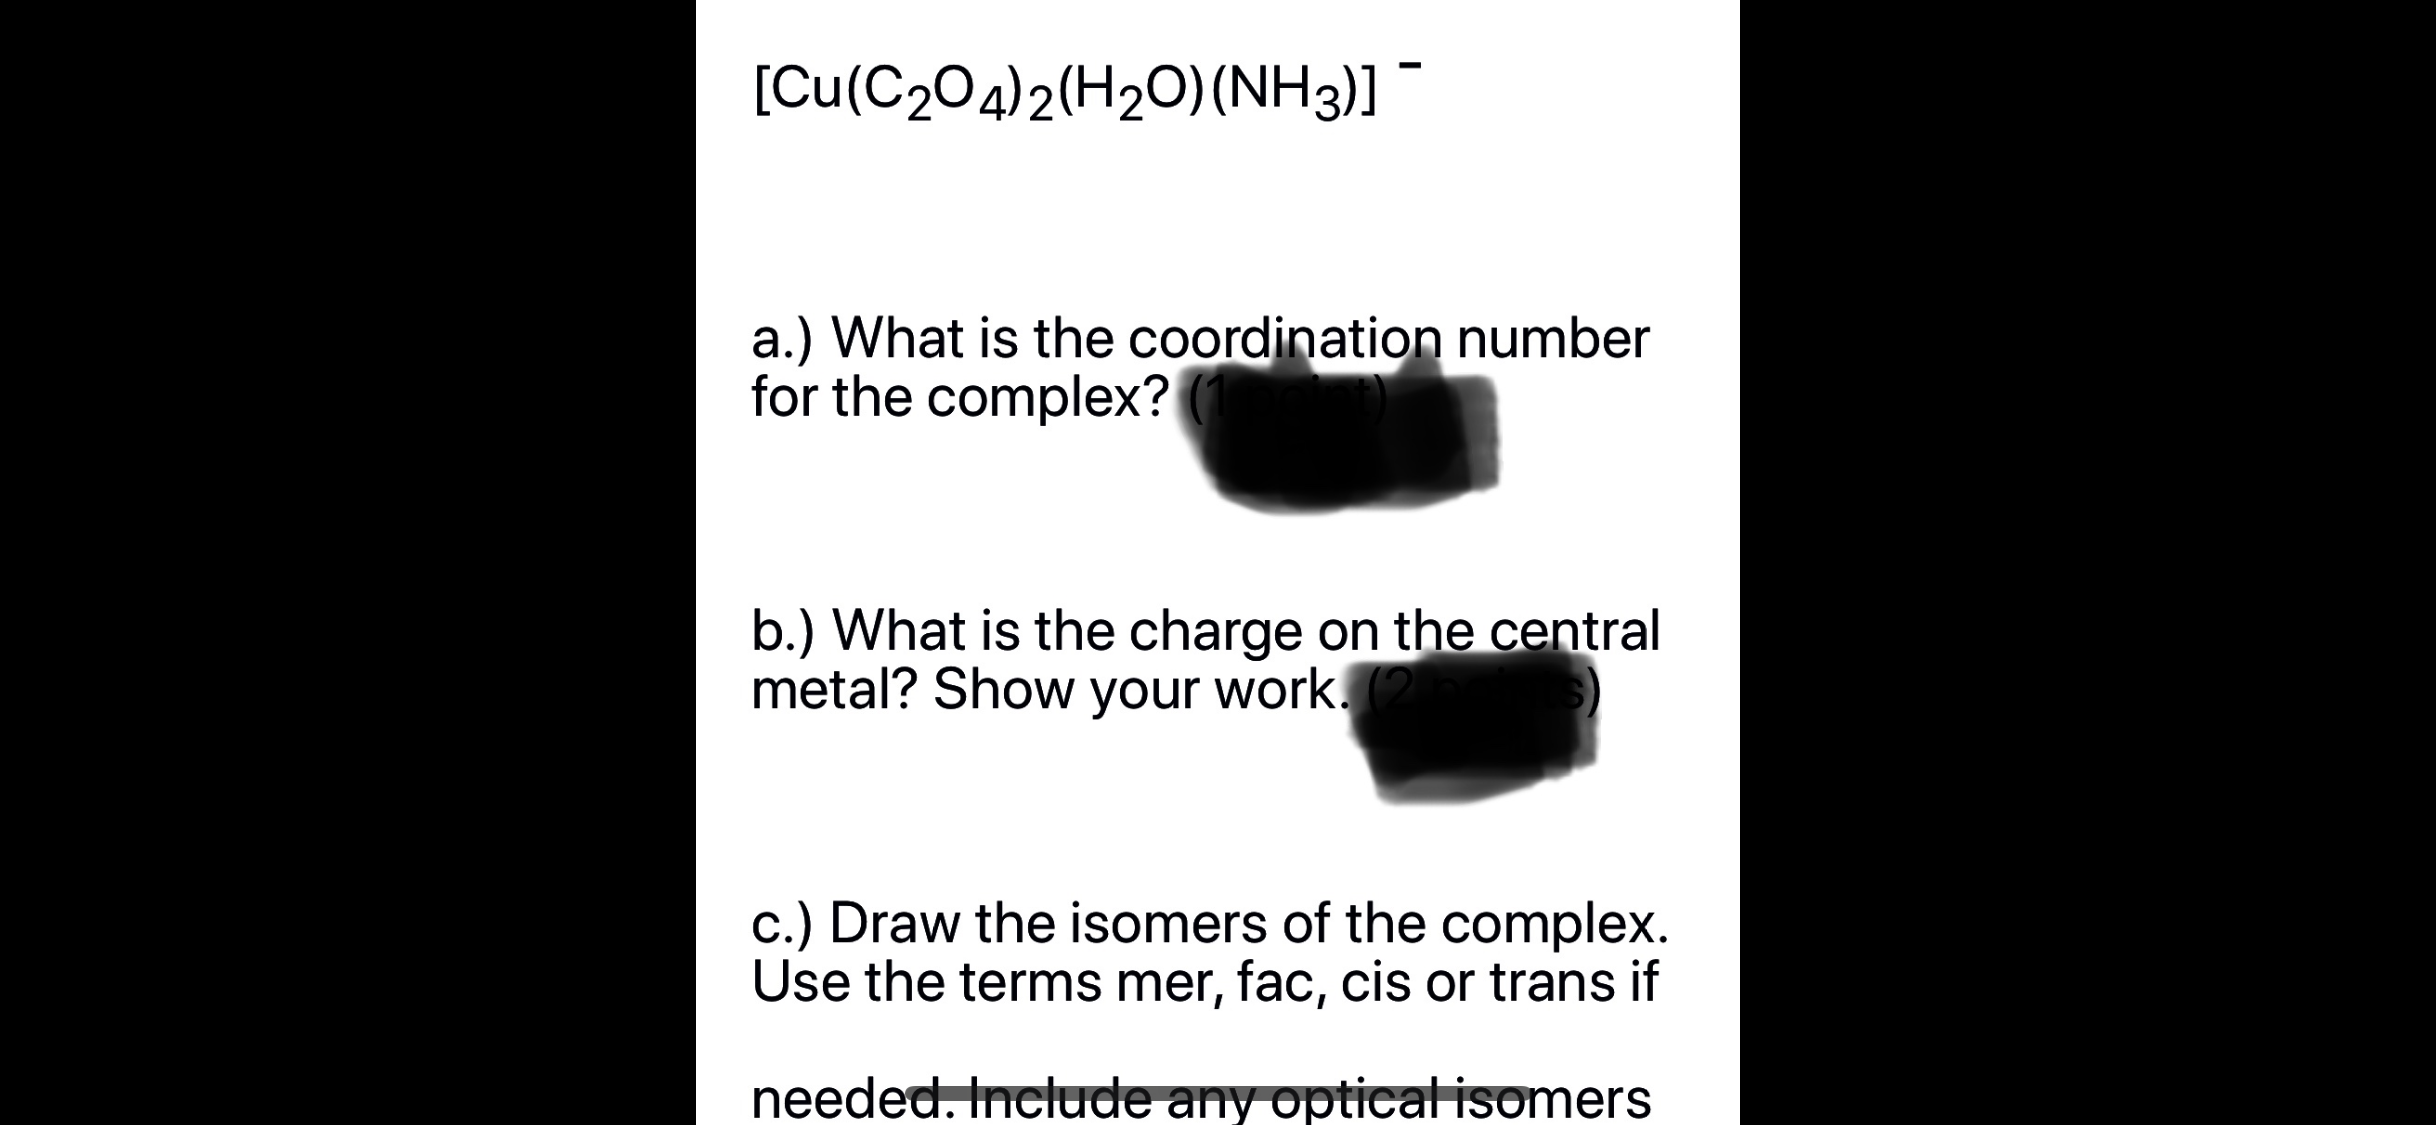 [Cu(C204)2(H20)(NH3)]
a.) What is the coordination number
for the complex?
b.) What is the charge on the central
metal? Show your work.
c.) Draw the isomers of the complex.
Use the terms mer, fac, cis or trans if
needed. Include any optical isomers
